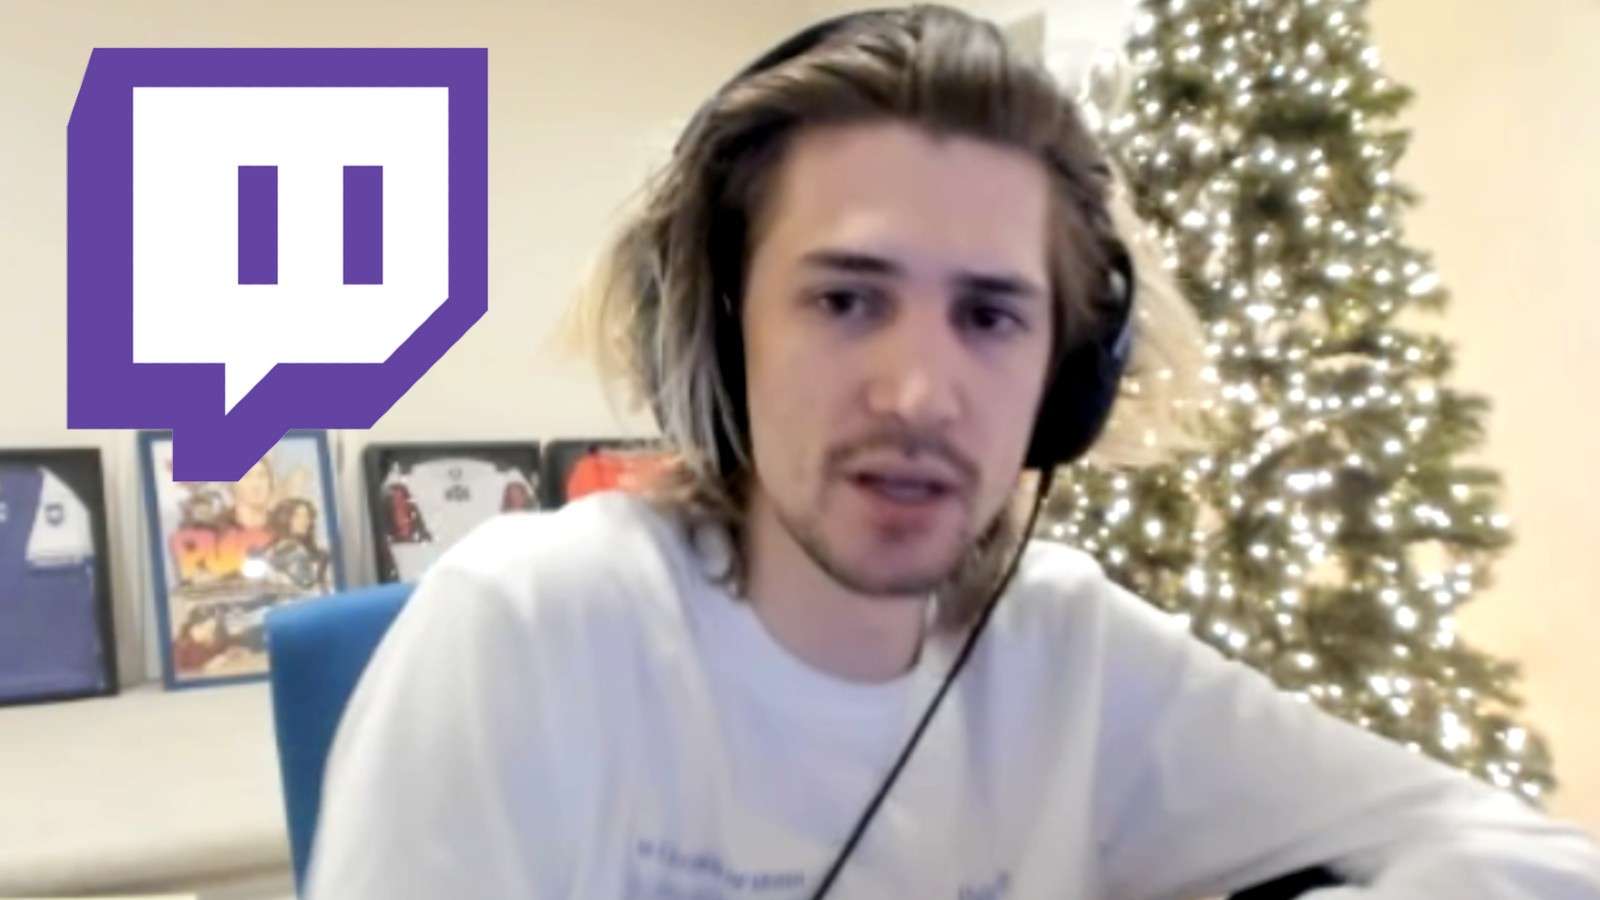 xQc in front of a tree with lights on, next to the Twitch logo